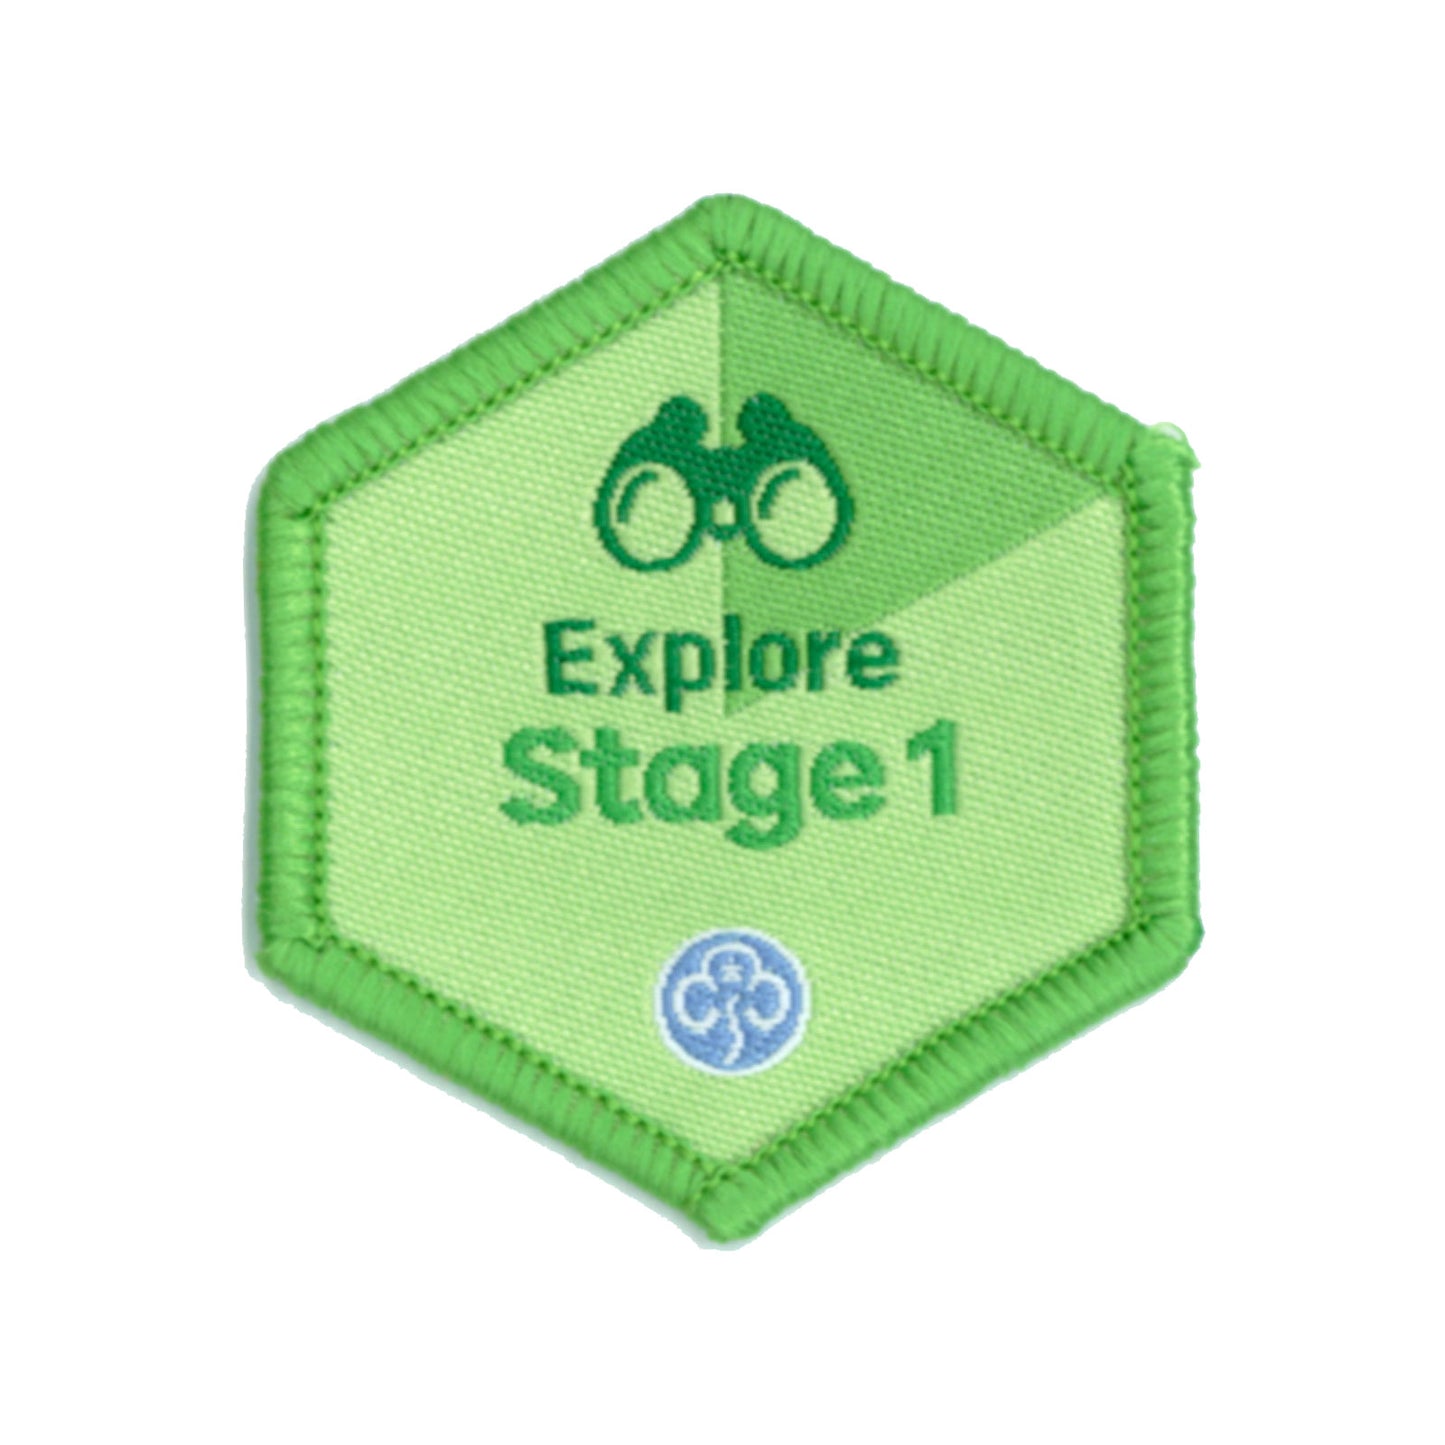 Skills Builder - Have Adventures - Explore Stage 1 Woven Badge